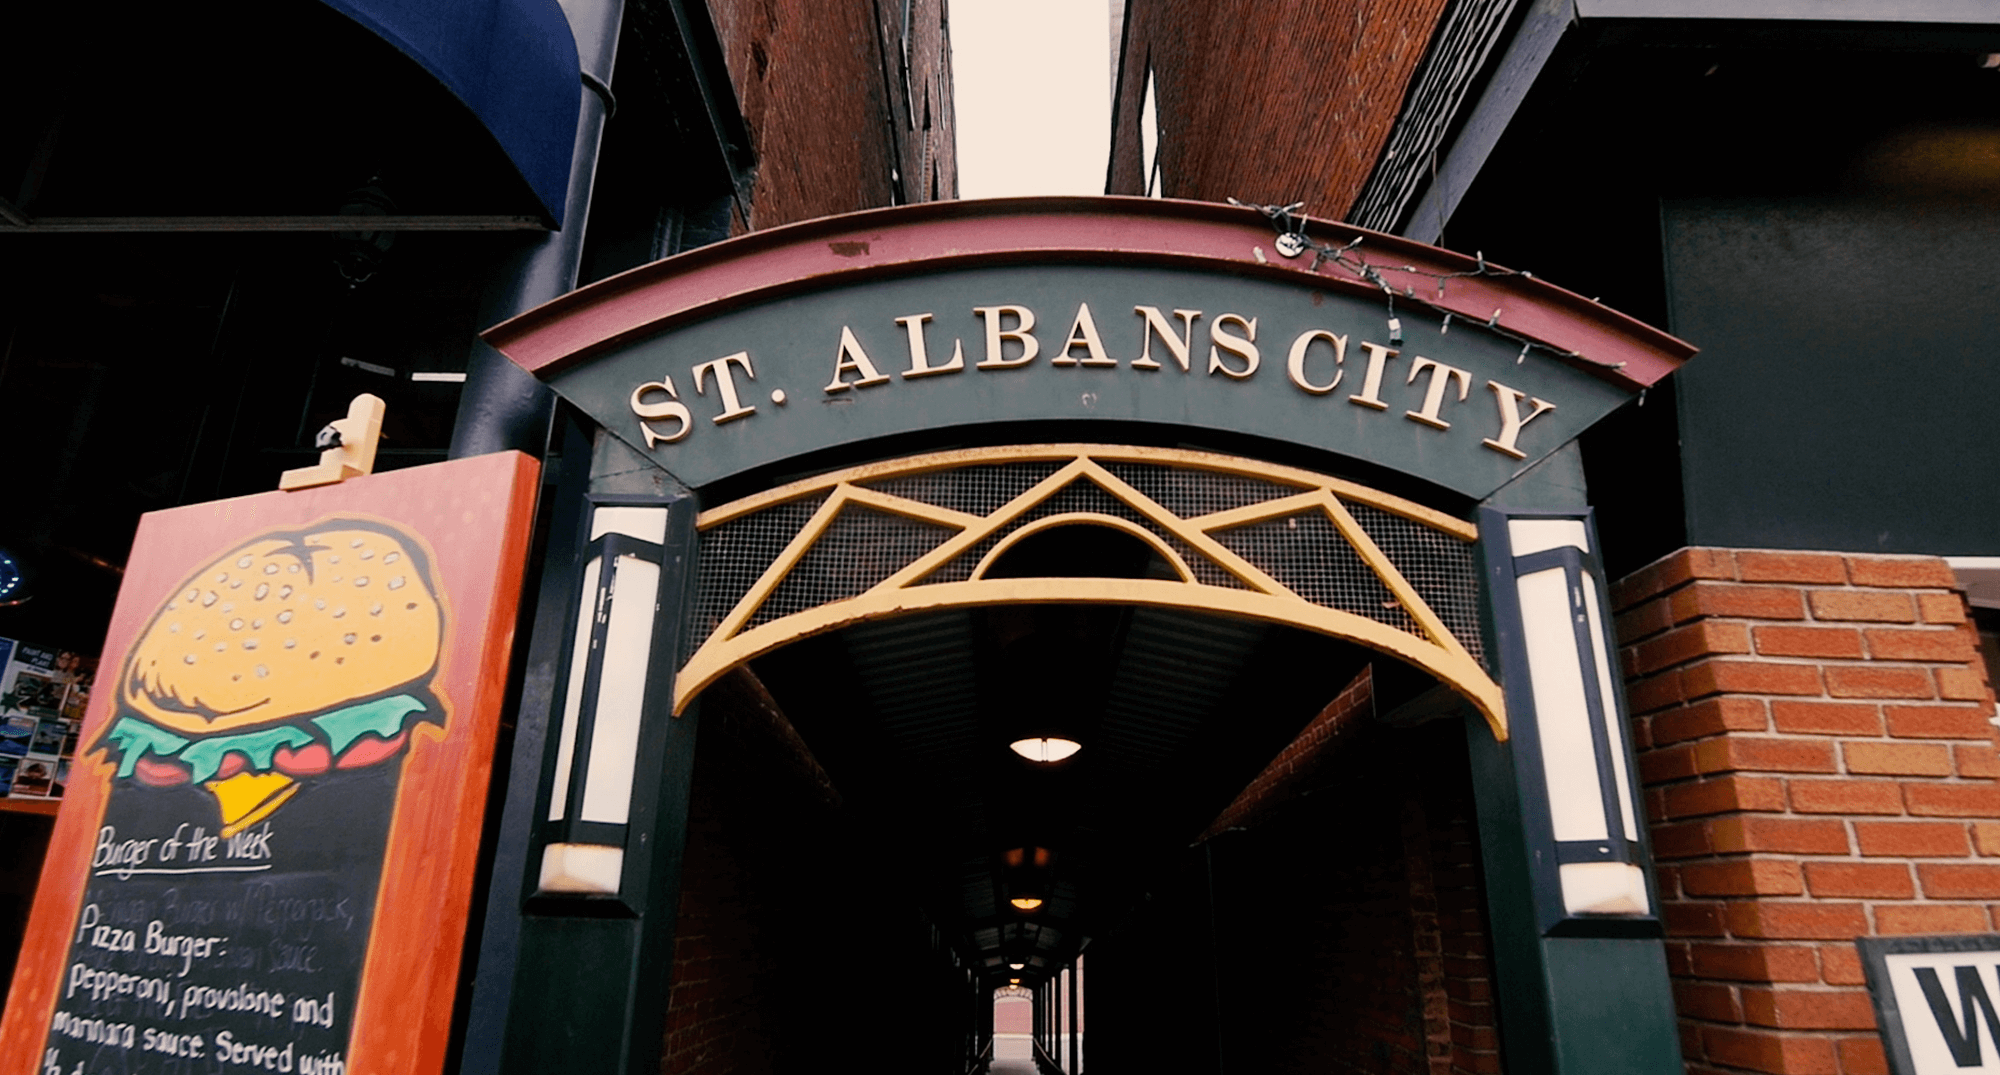 Metal banner that says St. Albans City